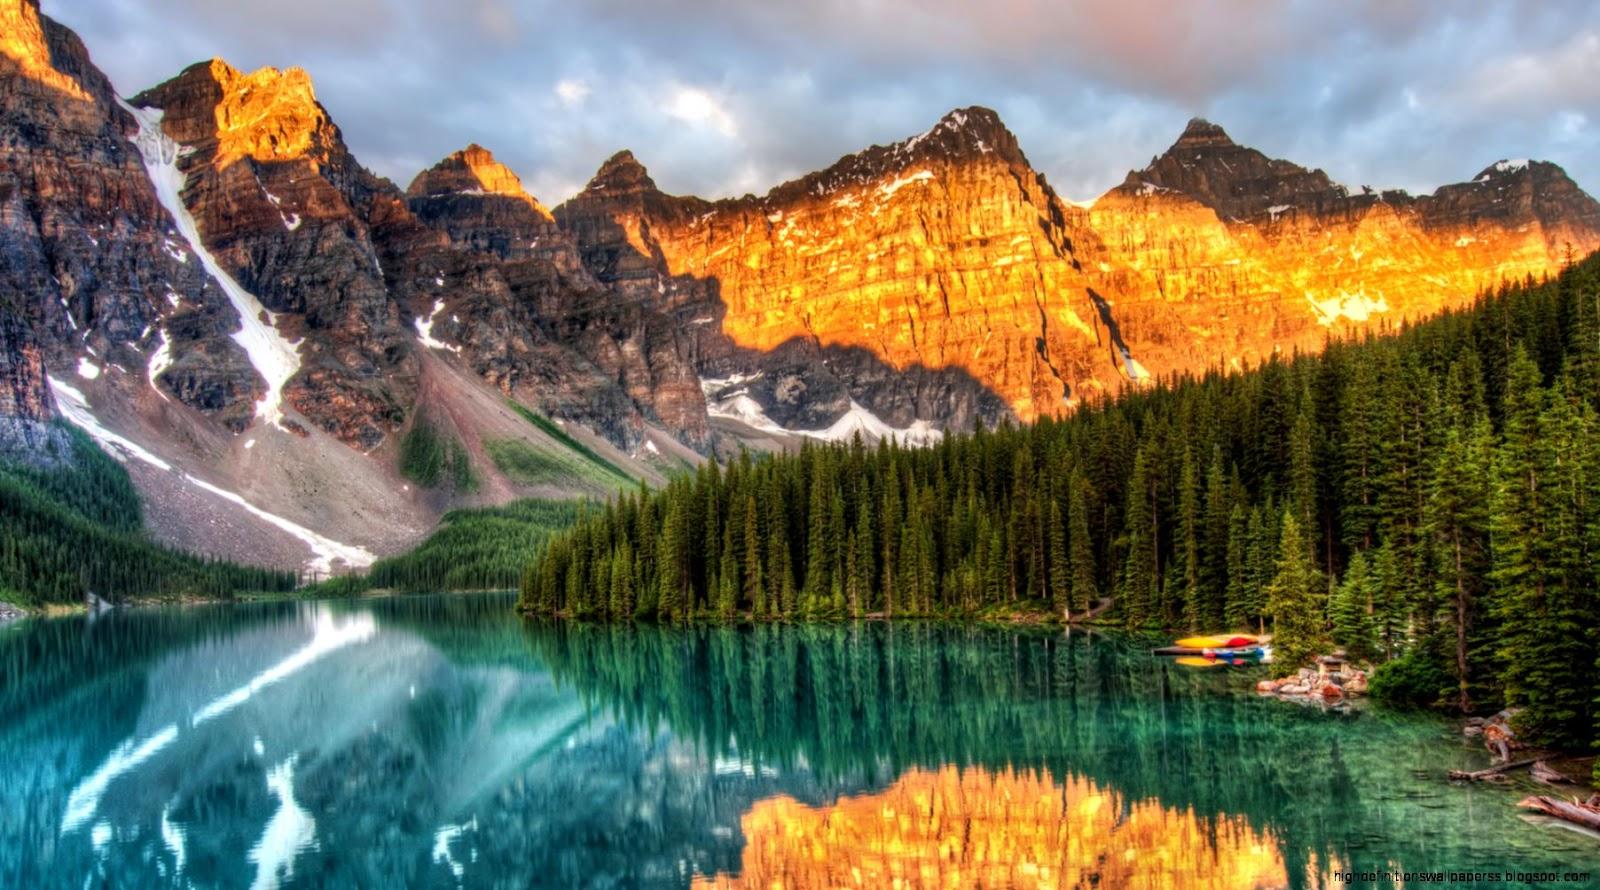 Sunset At Moraine Lake In The Mountains HD Wallpaper. High